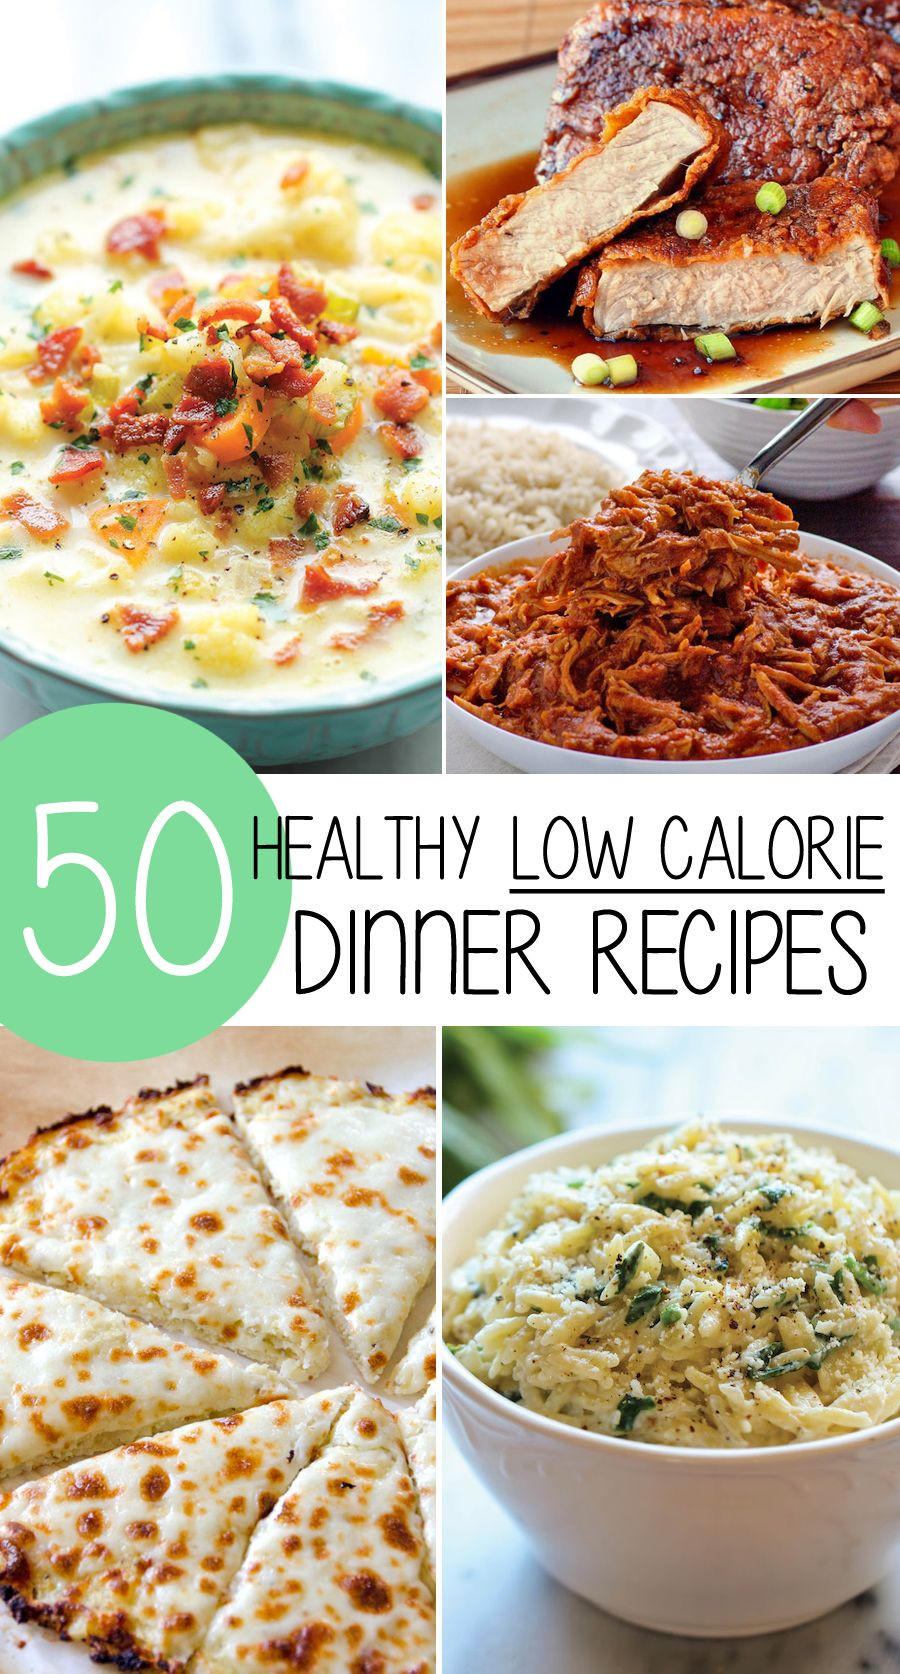 Best Low Calorie Recipes
 Best low calorie recipes for weight loss